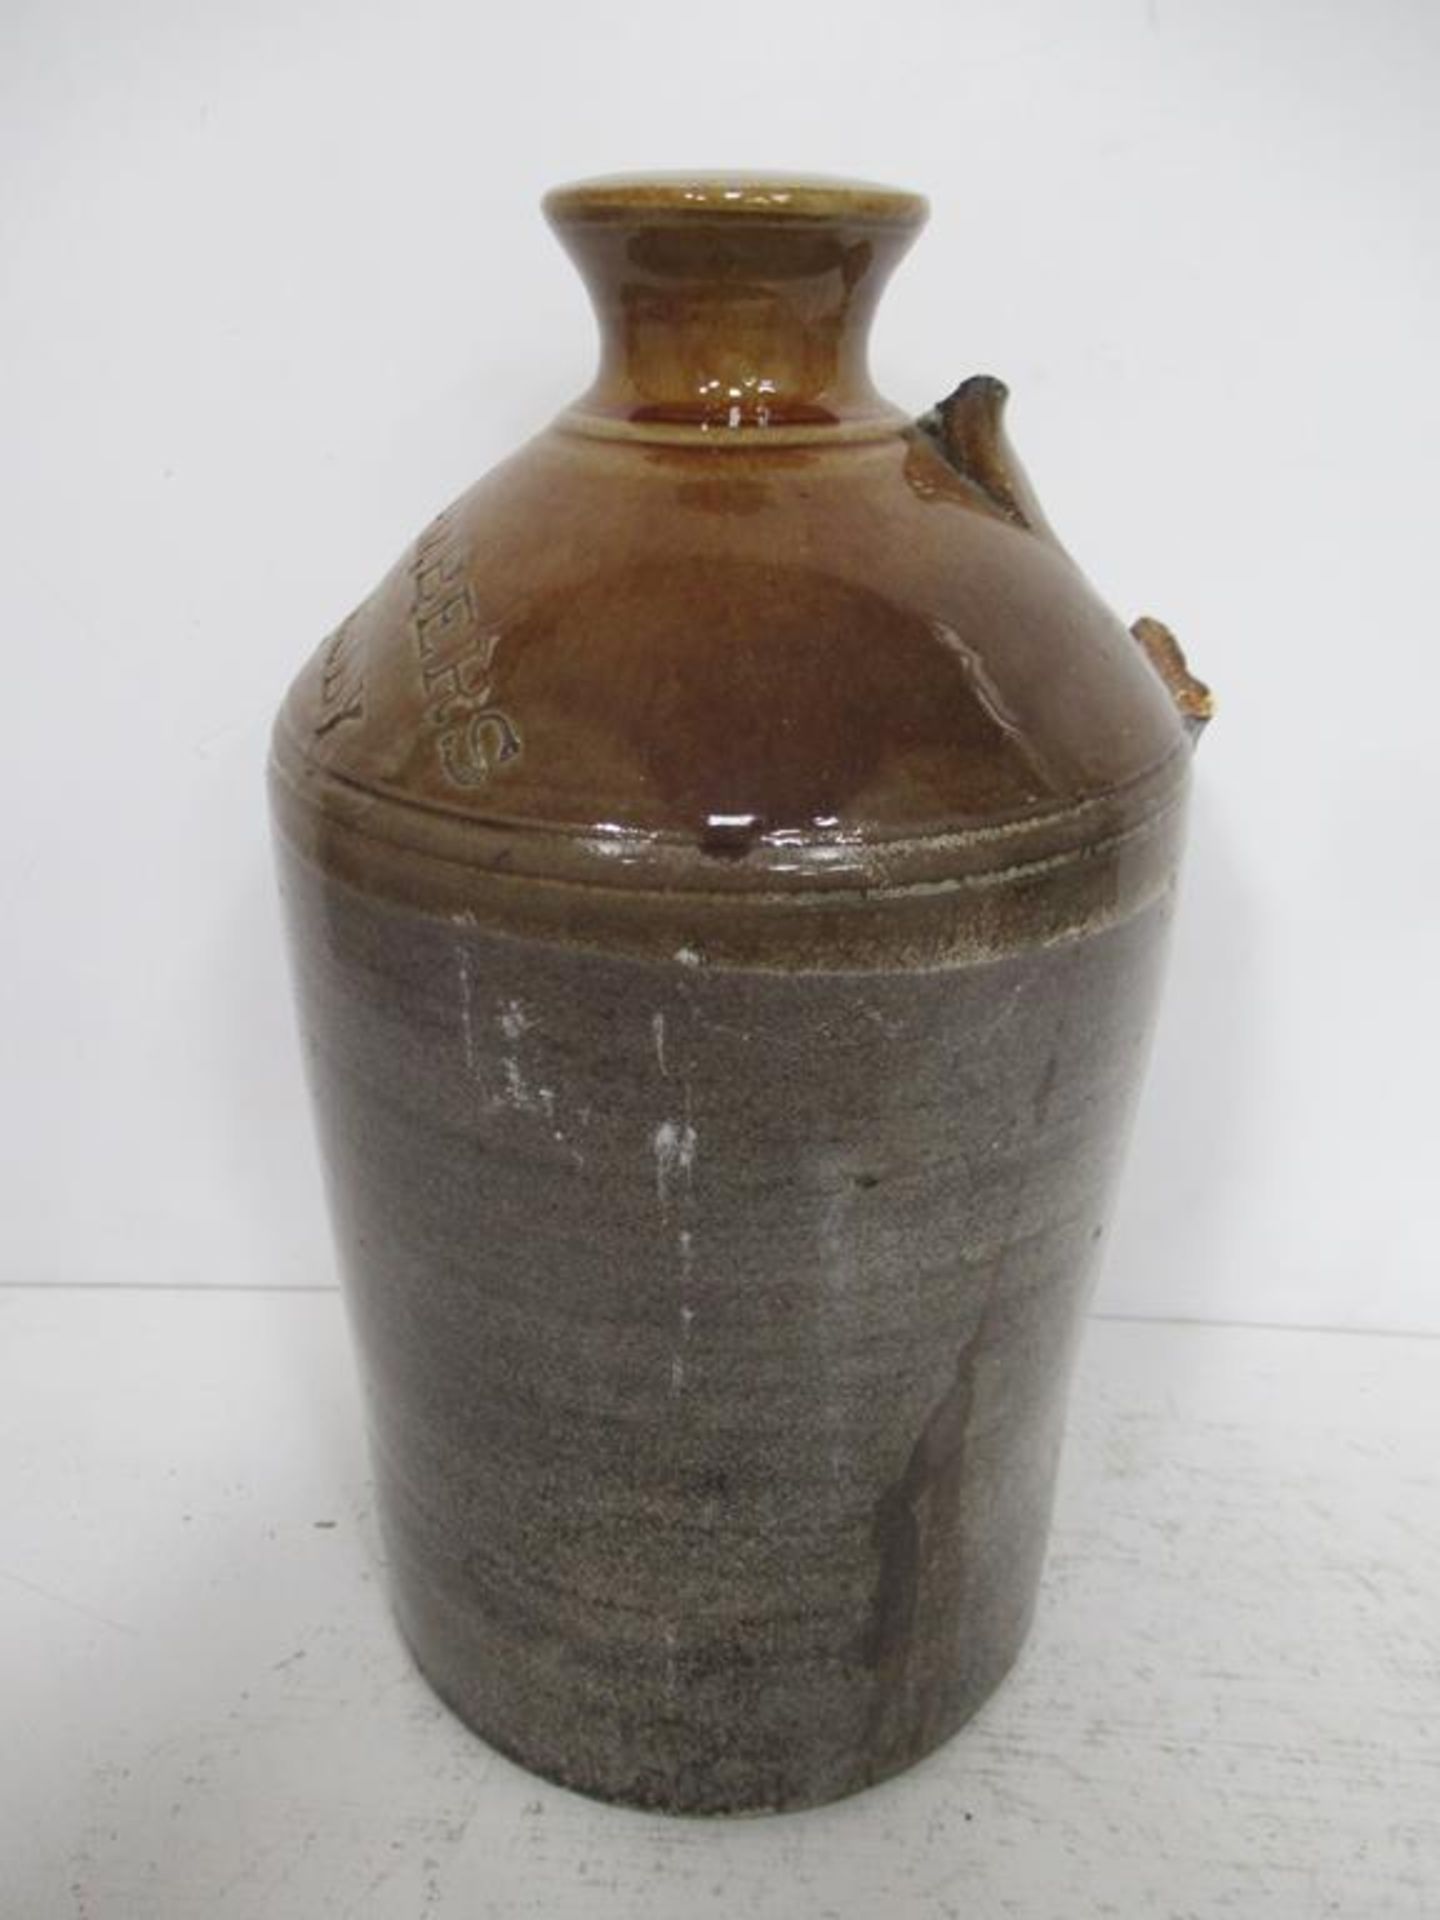 S.H. Chambers Grimsby Flagon "missing handle" - Image 2 of 10